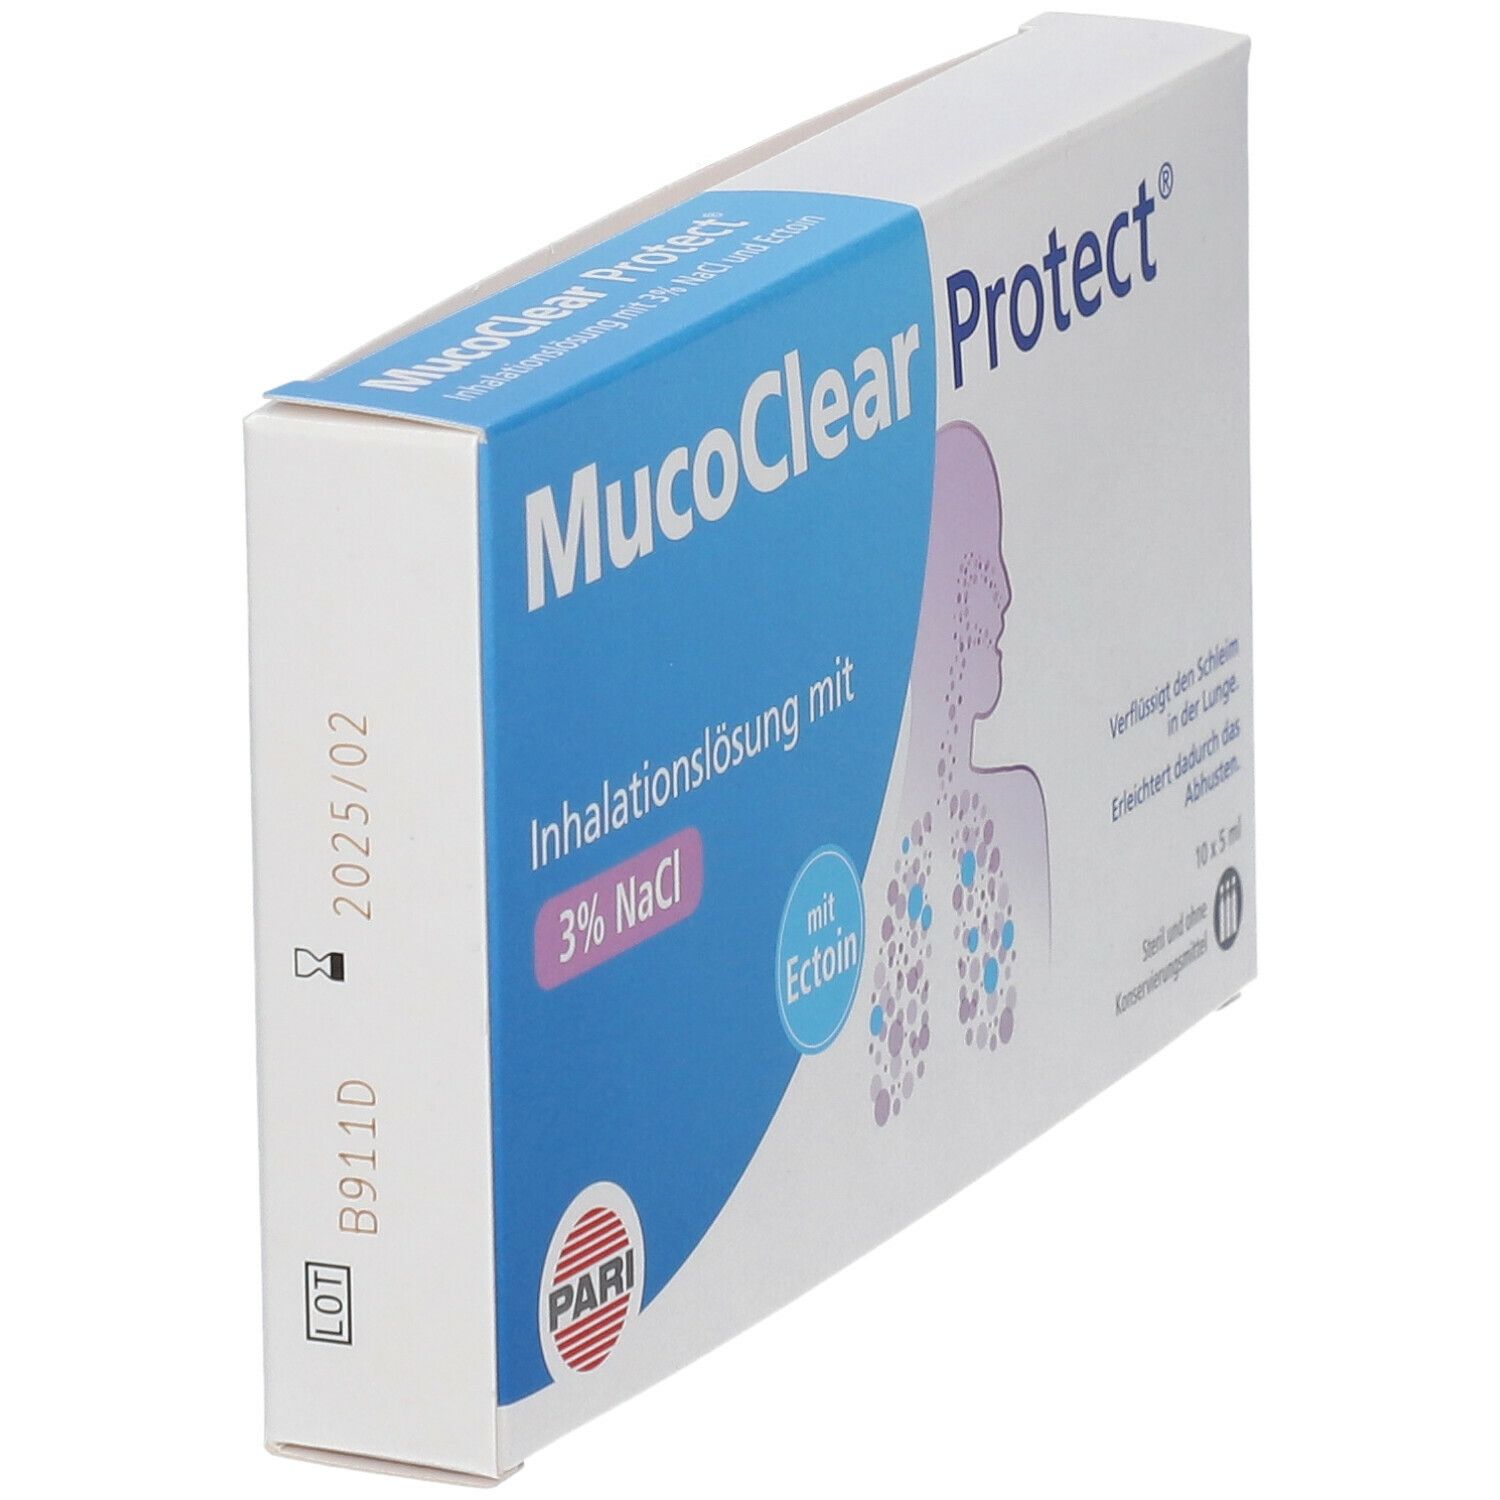 MucoClear Protect Hypertone Salzlösung (3% NaCl) mit Ectoin®